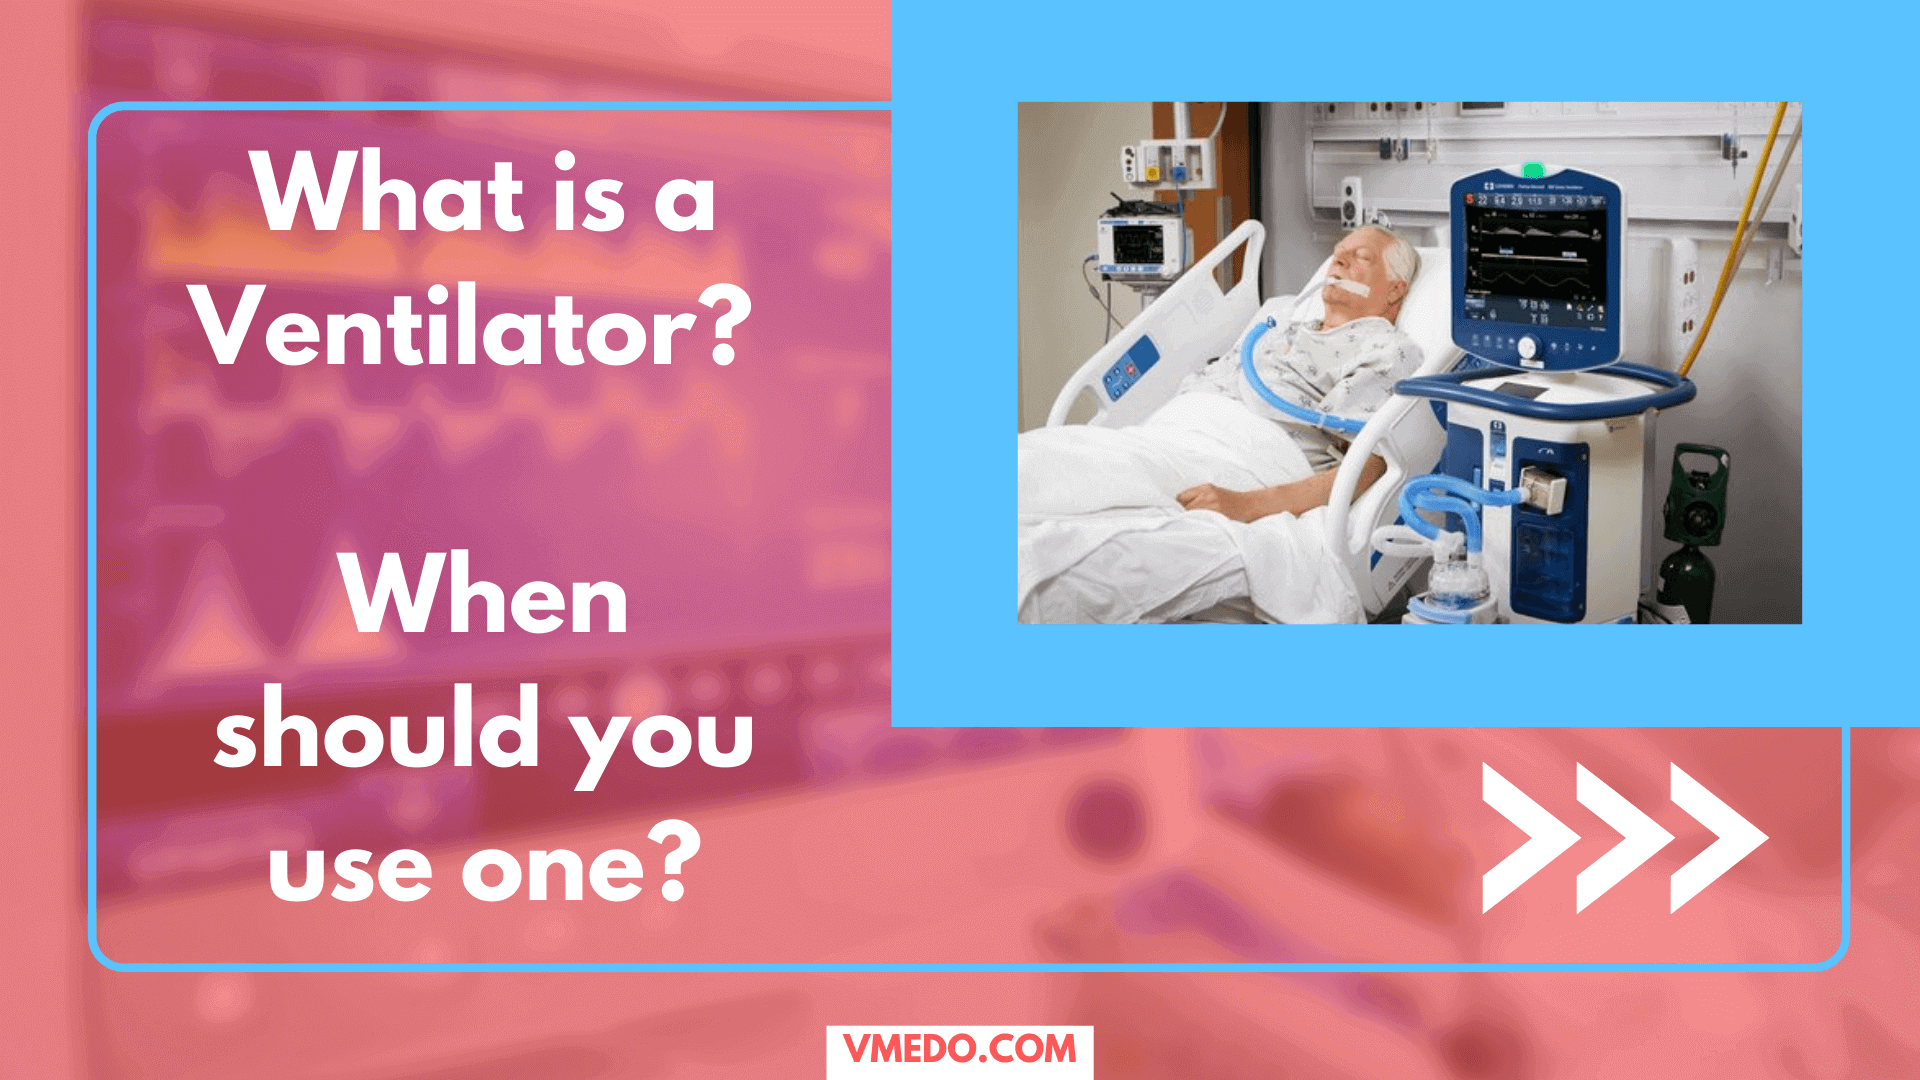 What is a Ventilator